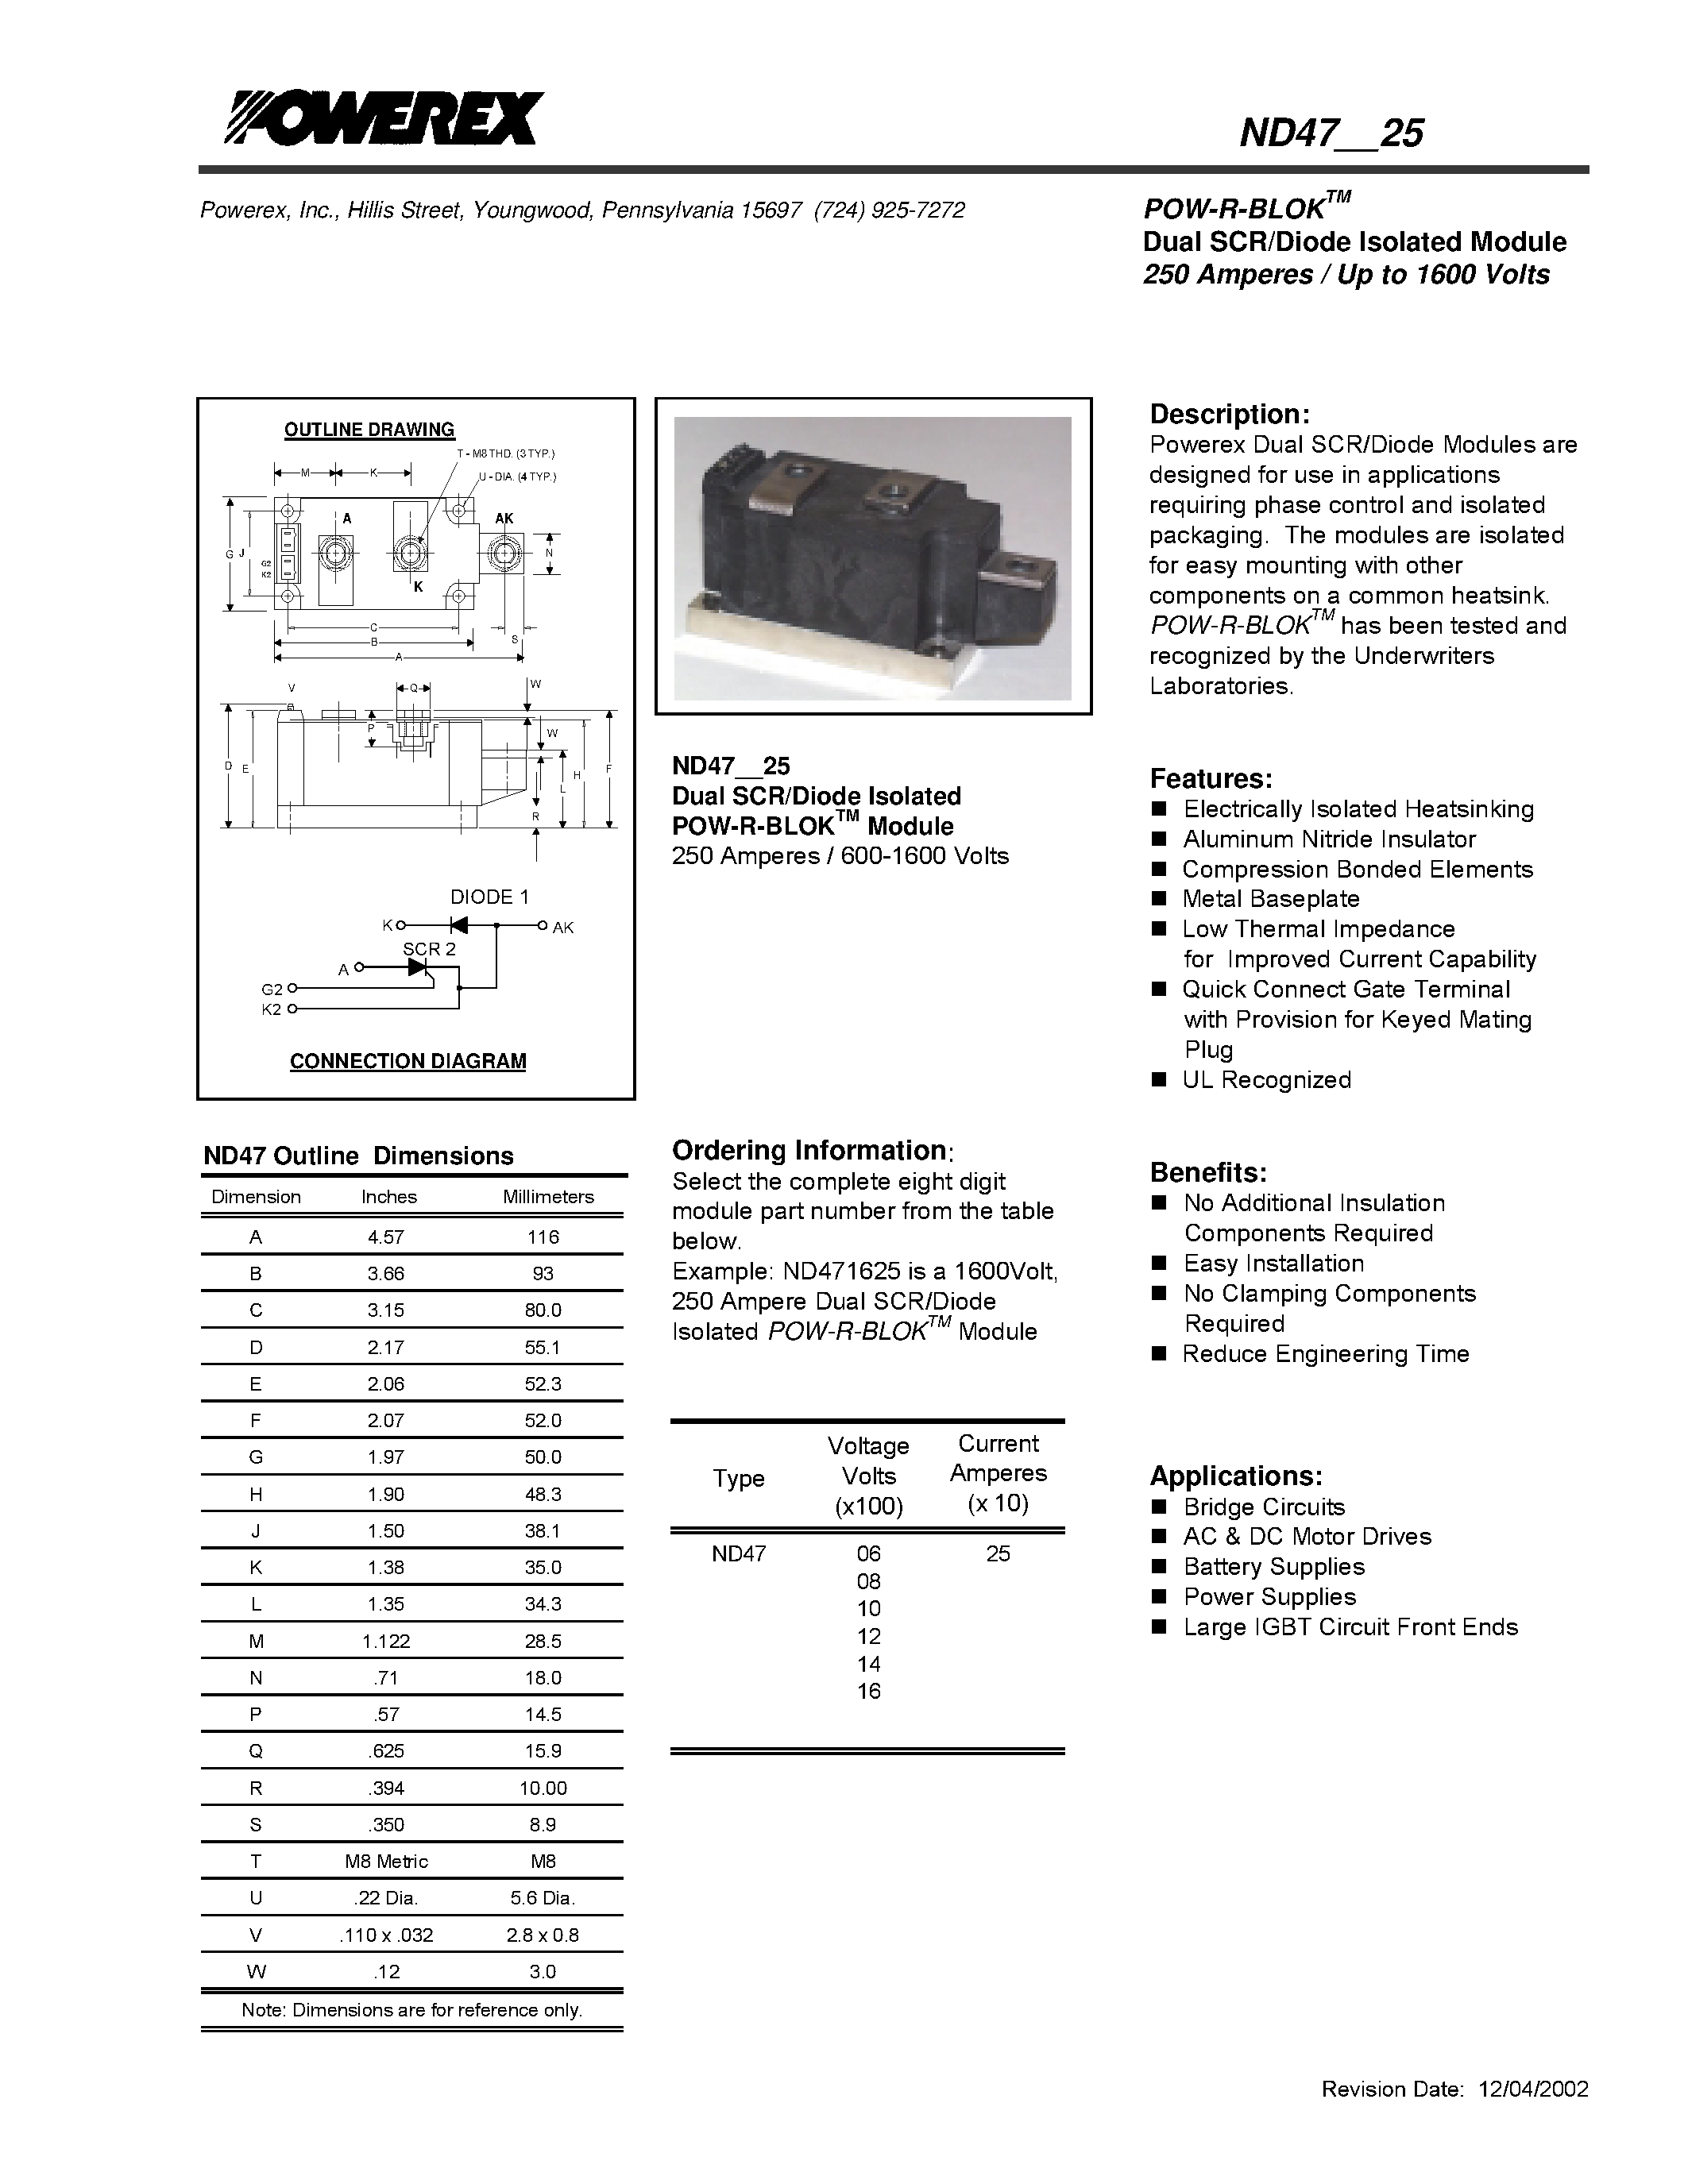 Datasheet ND4725 - POW-R-BLOK Dual SCR/Diode Isolated Module (250 Amperes / Up to 1600 Volts) page 1